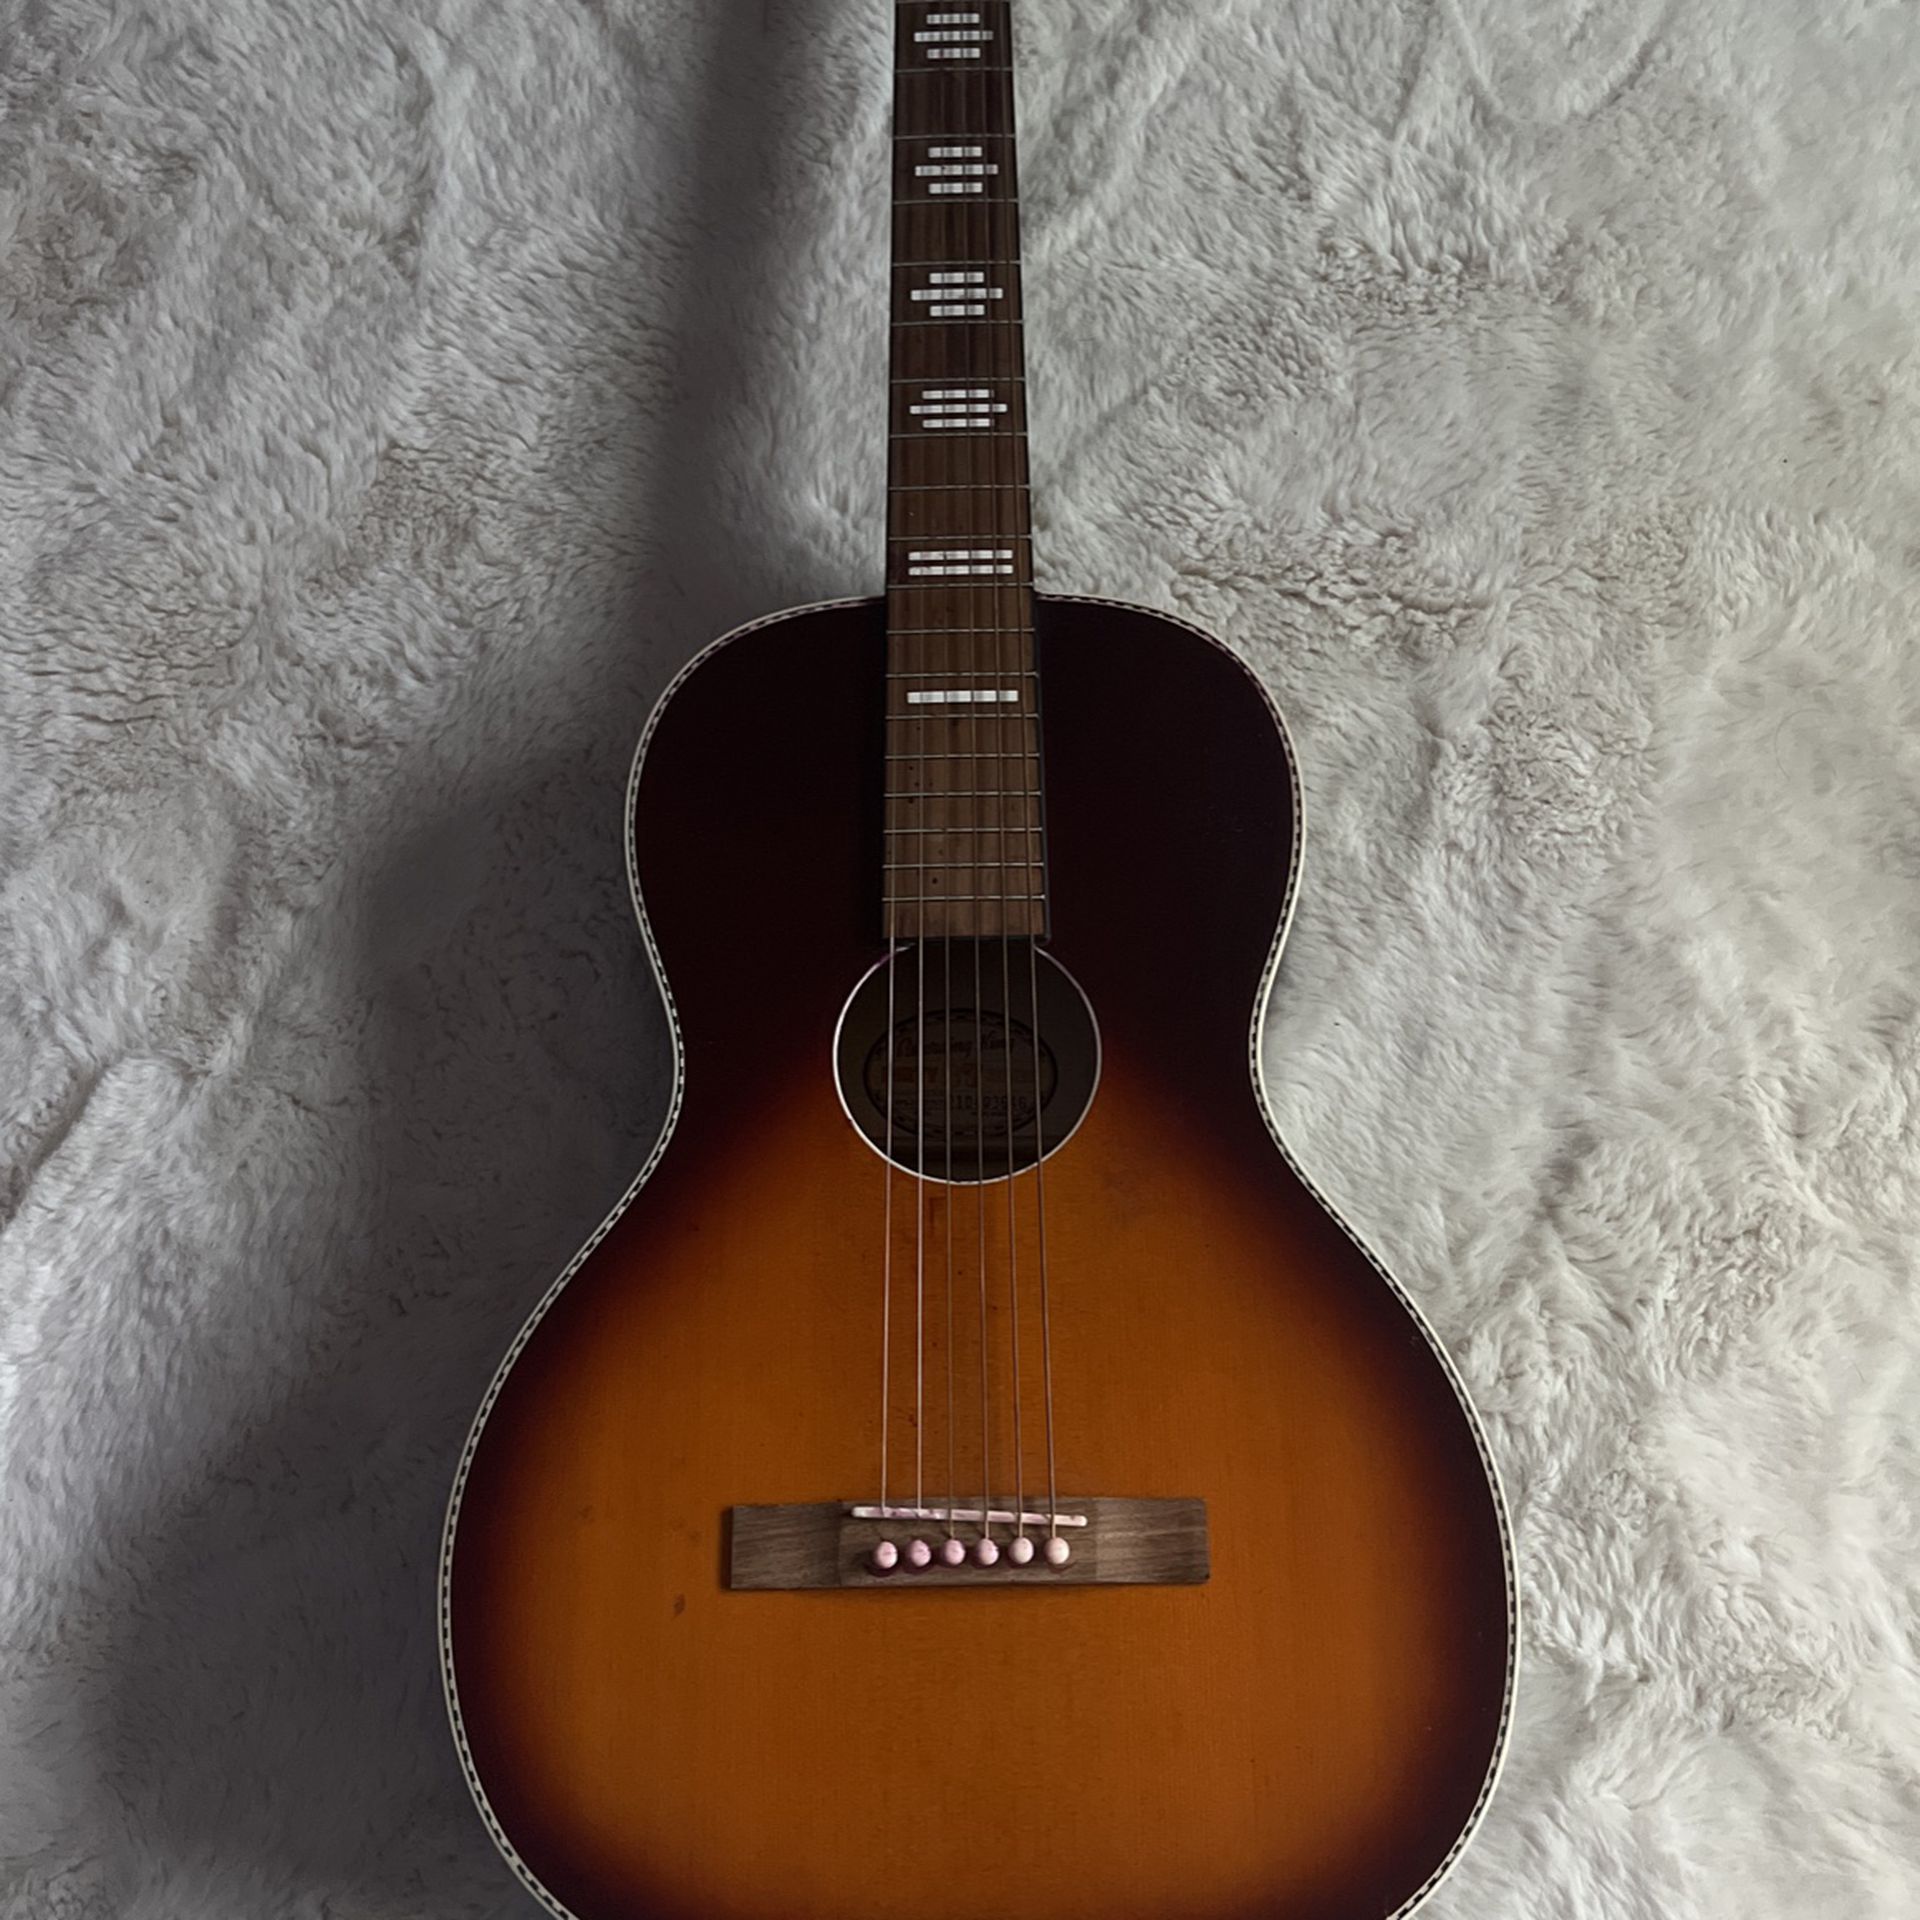 Lefty Acoustic Guitar - Recording King 